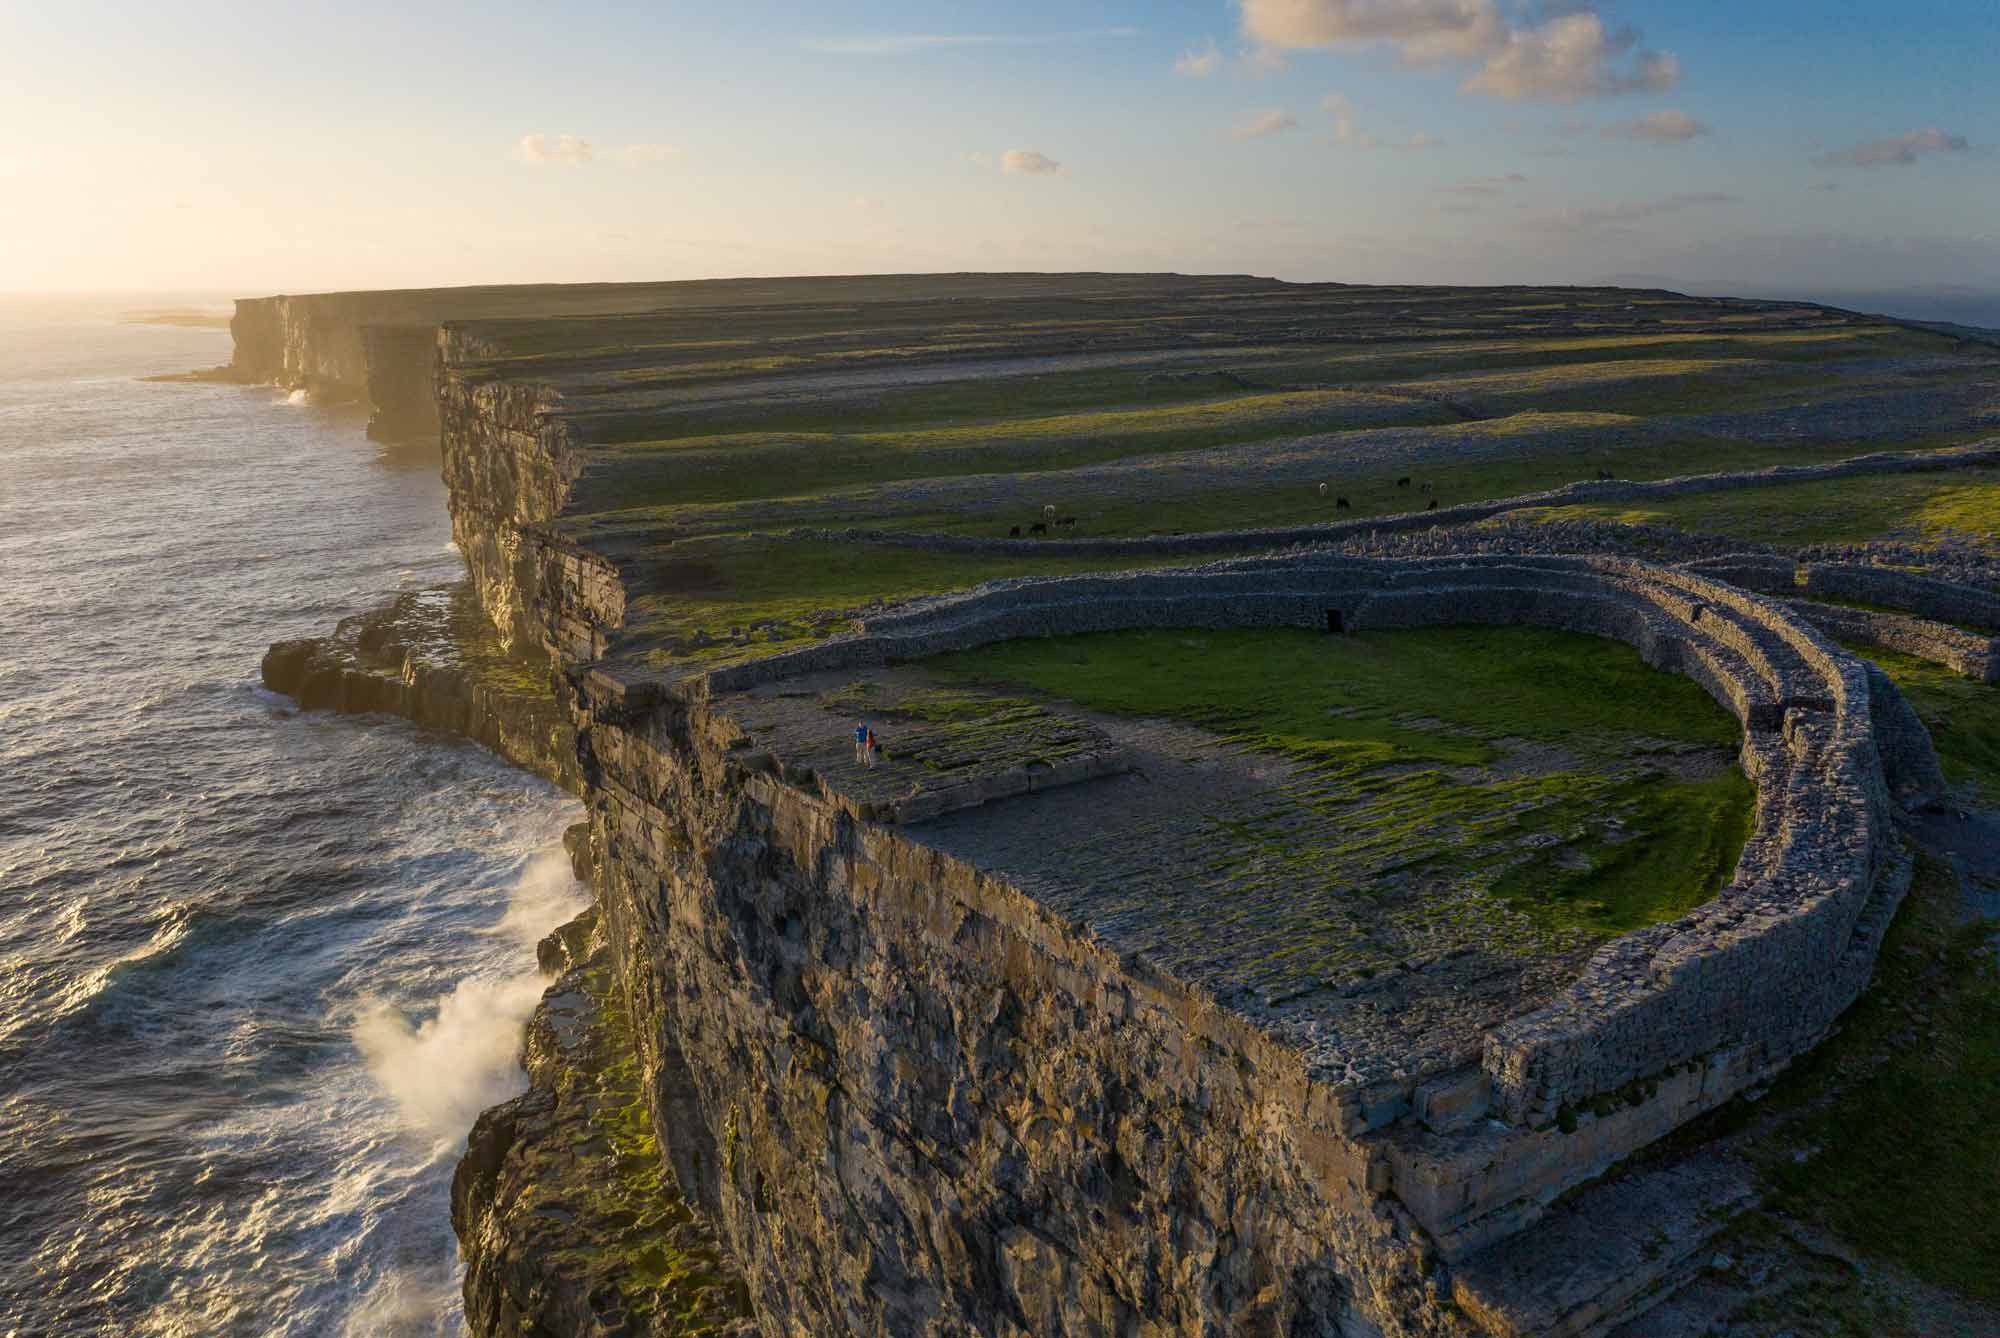 Inis Mór's Dún Aonghasa, the Dun Aengus fort on Inishmore. Credit: heritageireland.ie